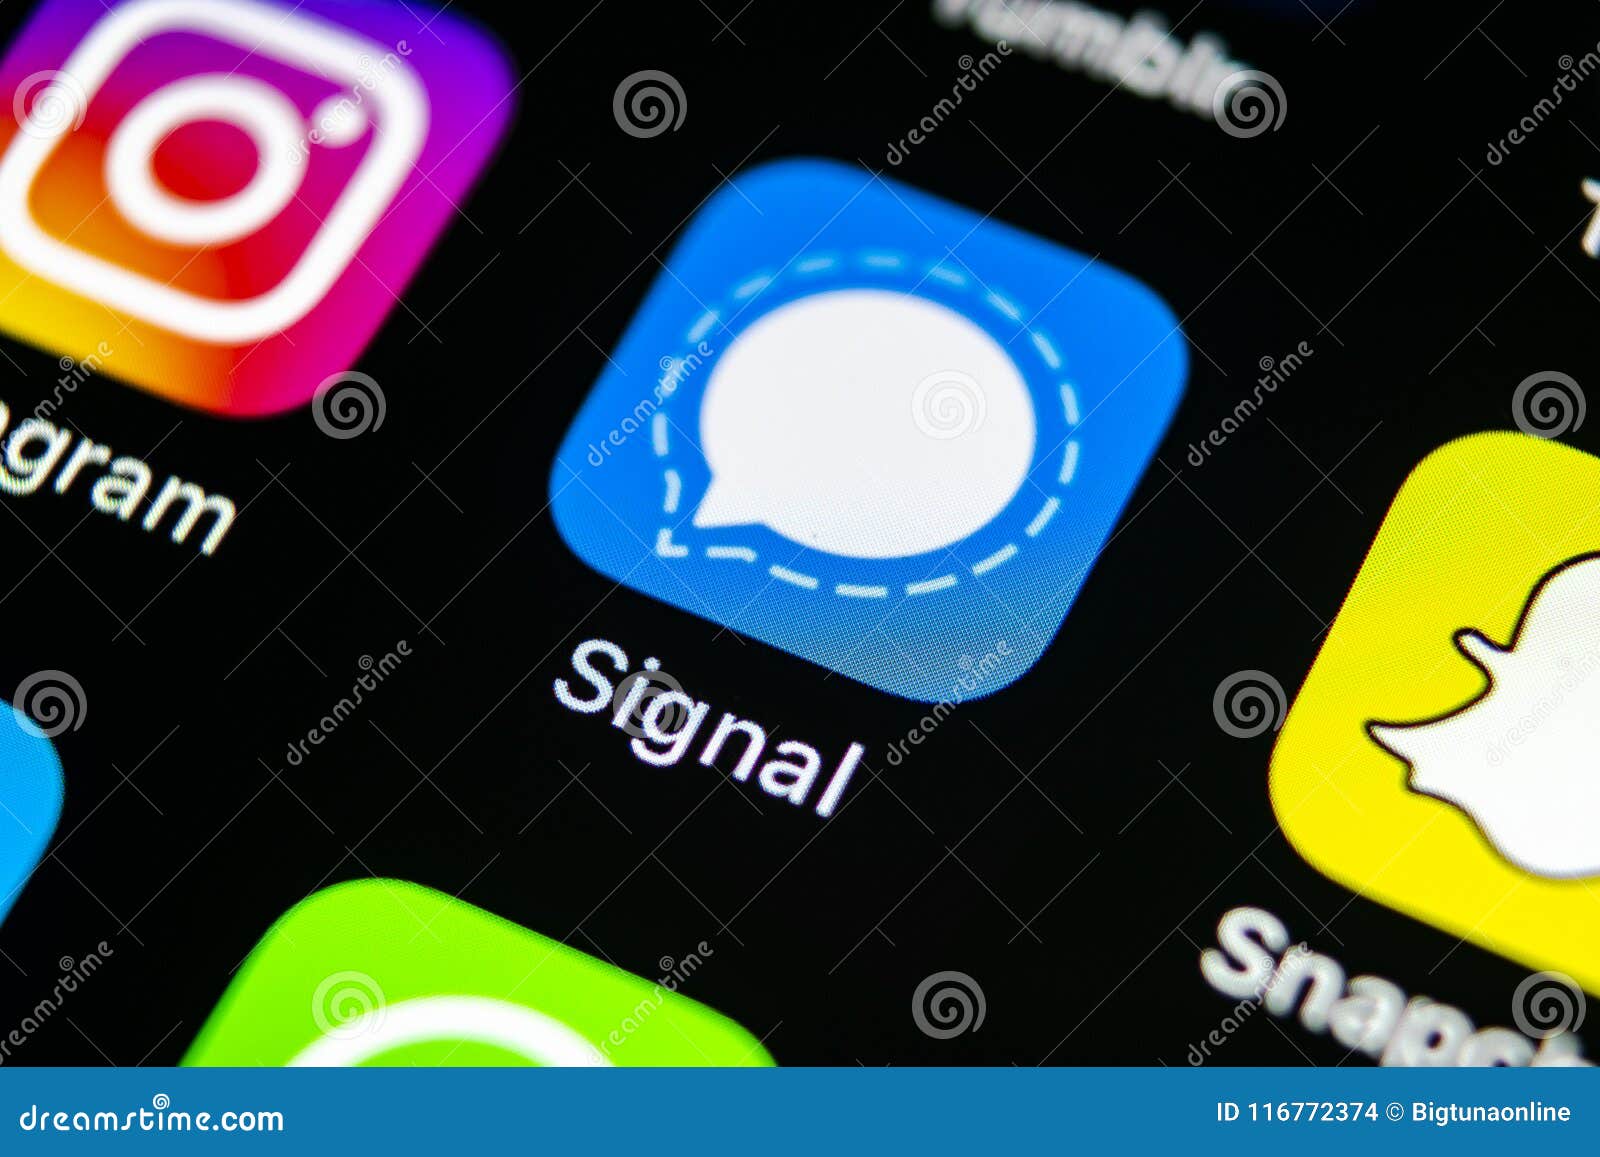 Signal Messenger Application Icon On Apple IPhone X ...